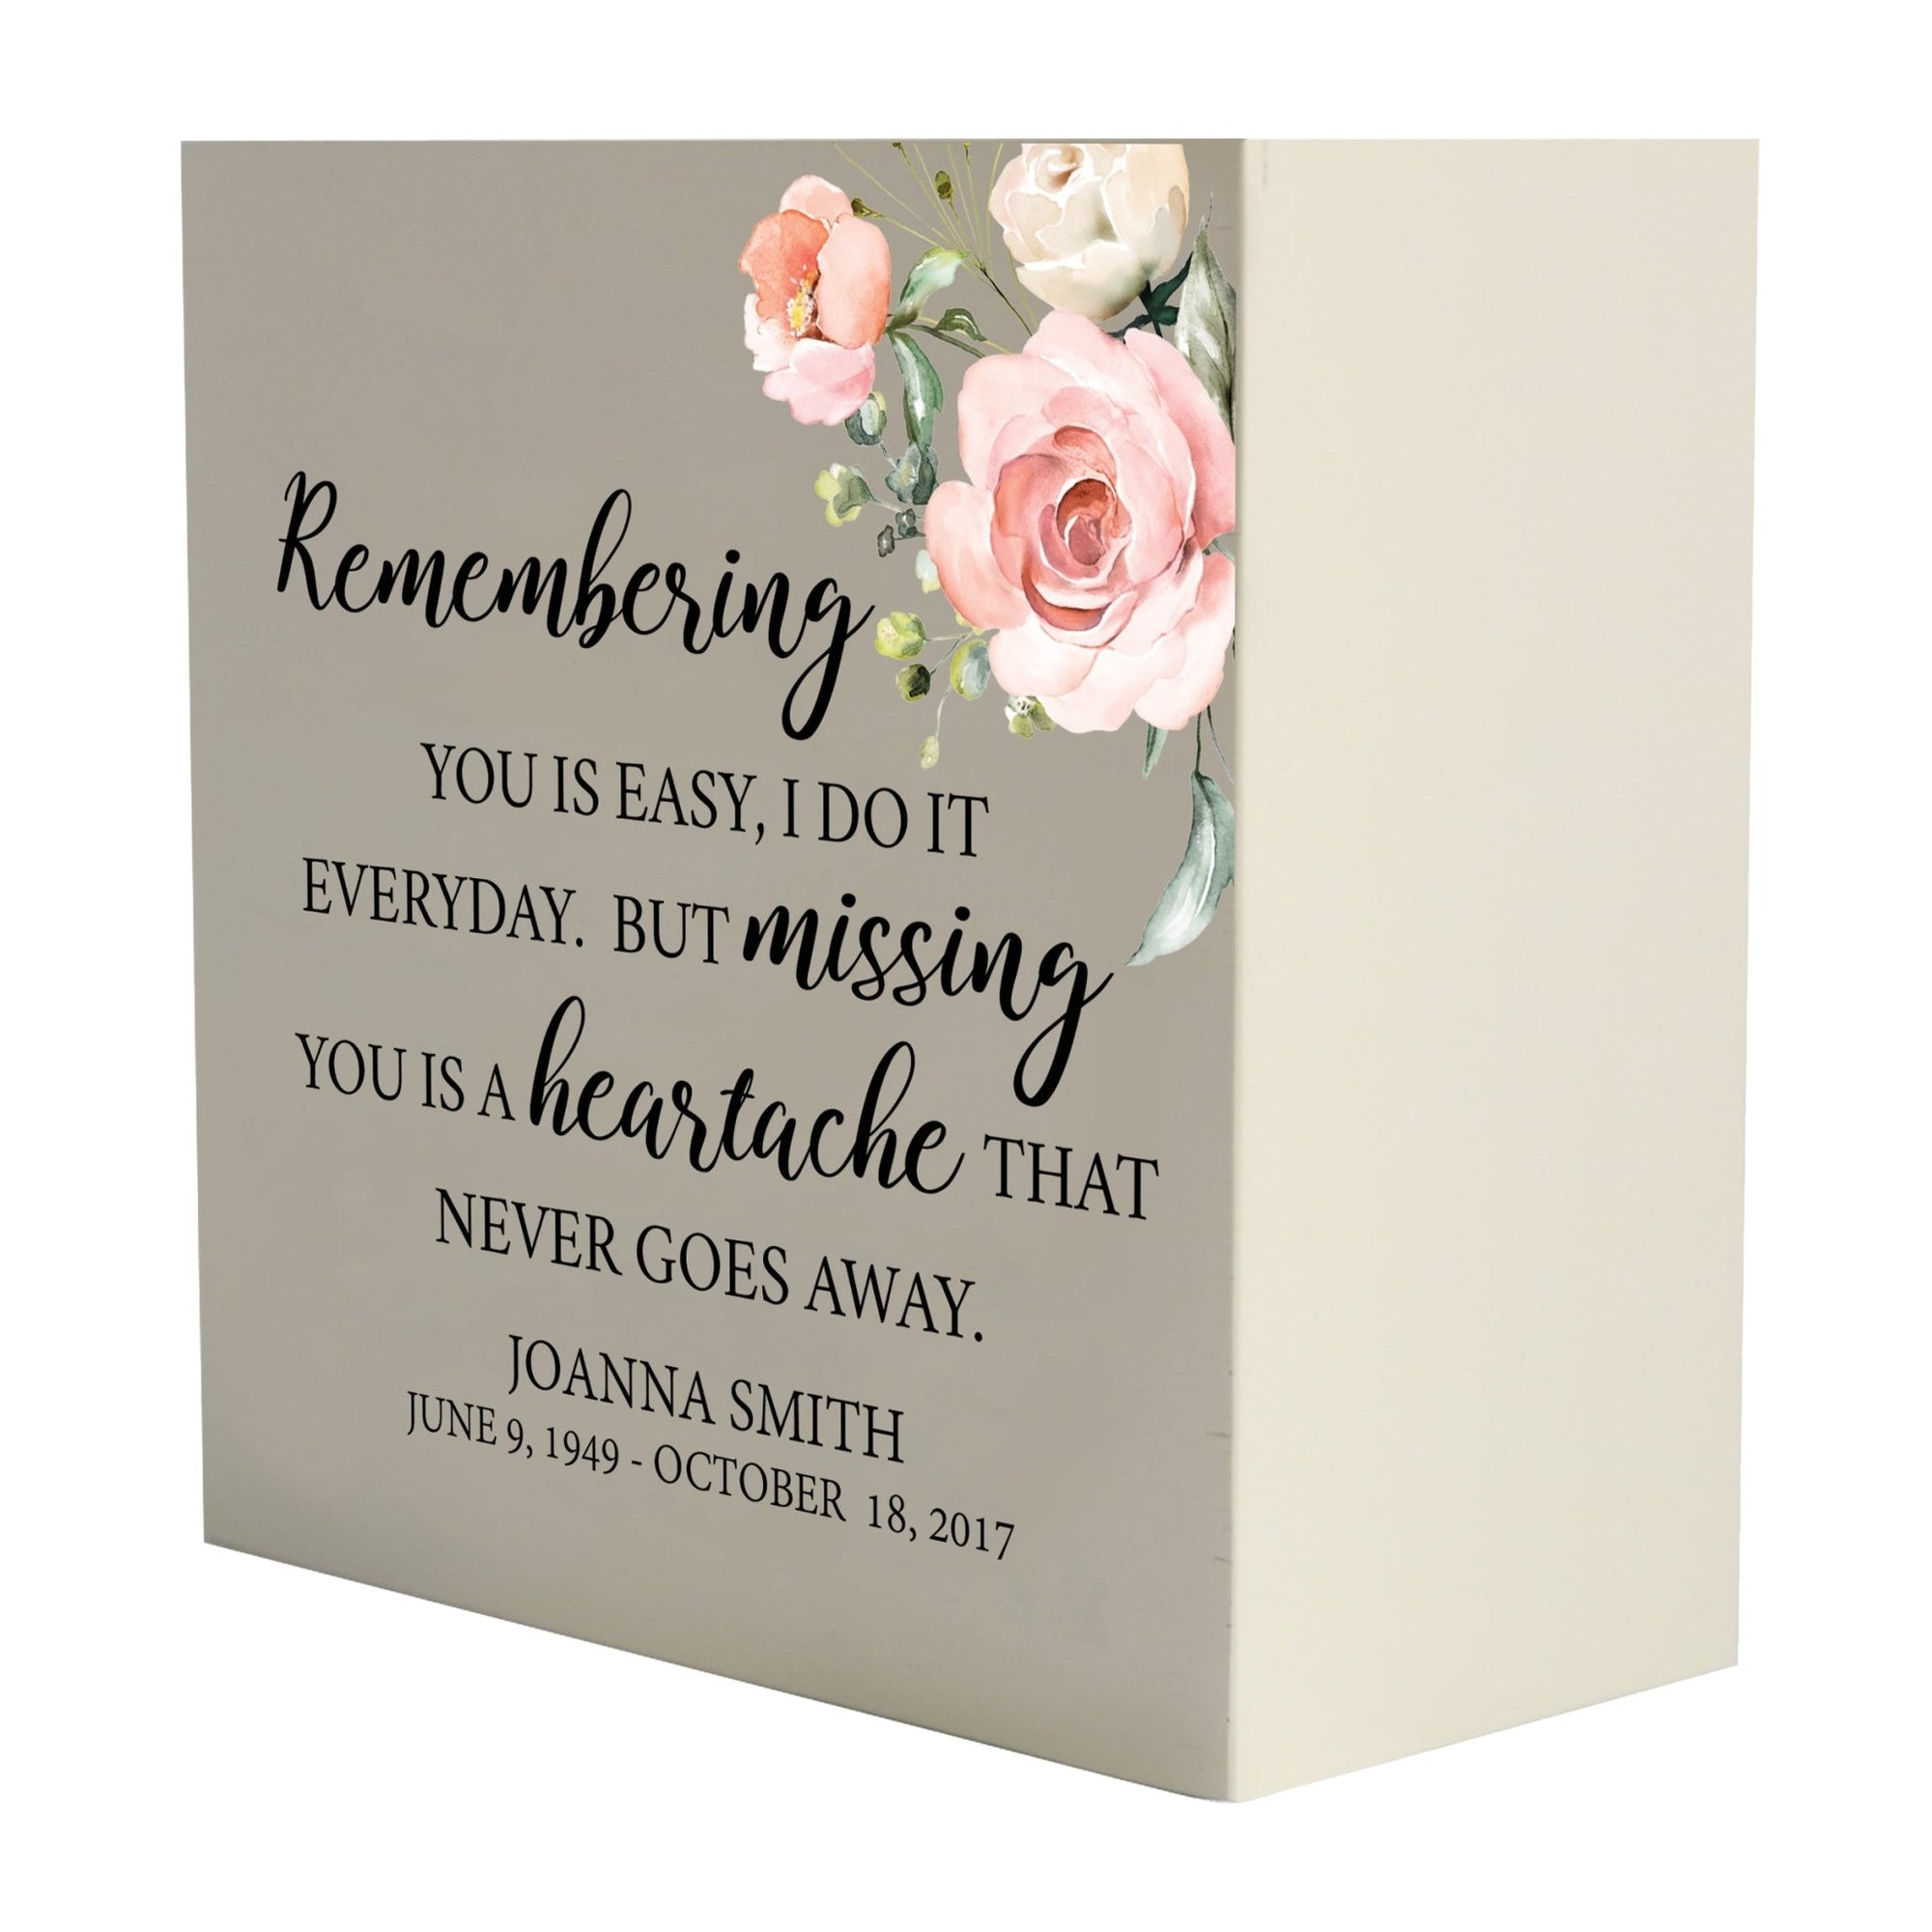 Personalized Modern Inspirational Memorial Wooden Shadow Box and Urn 6x6 holds 53 cu in of Human Ashes - Remembering You Is Easy (Missing) - LifeSong Milestones